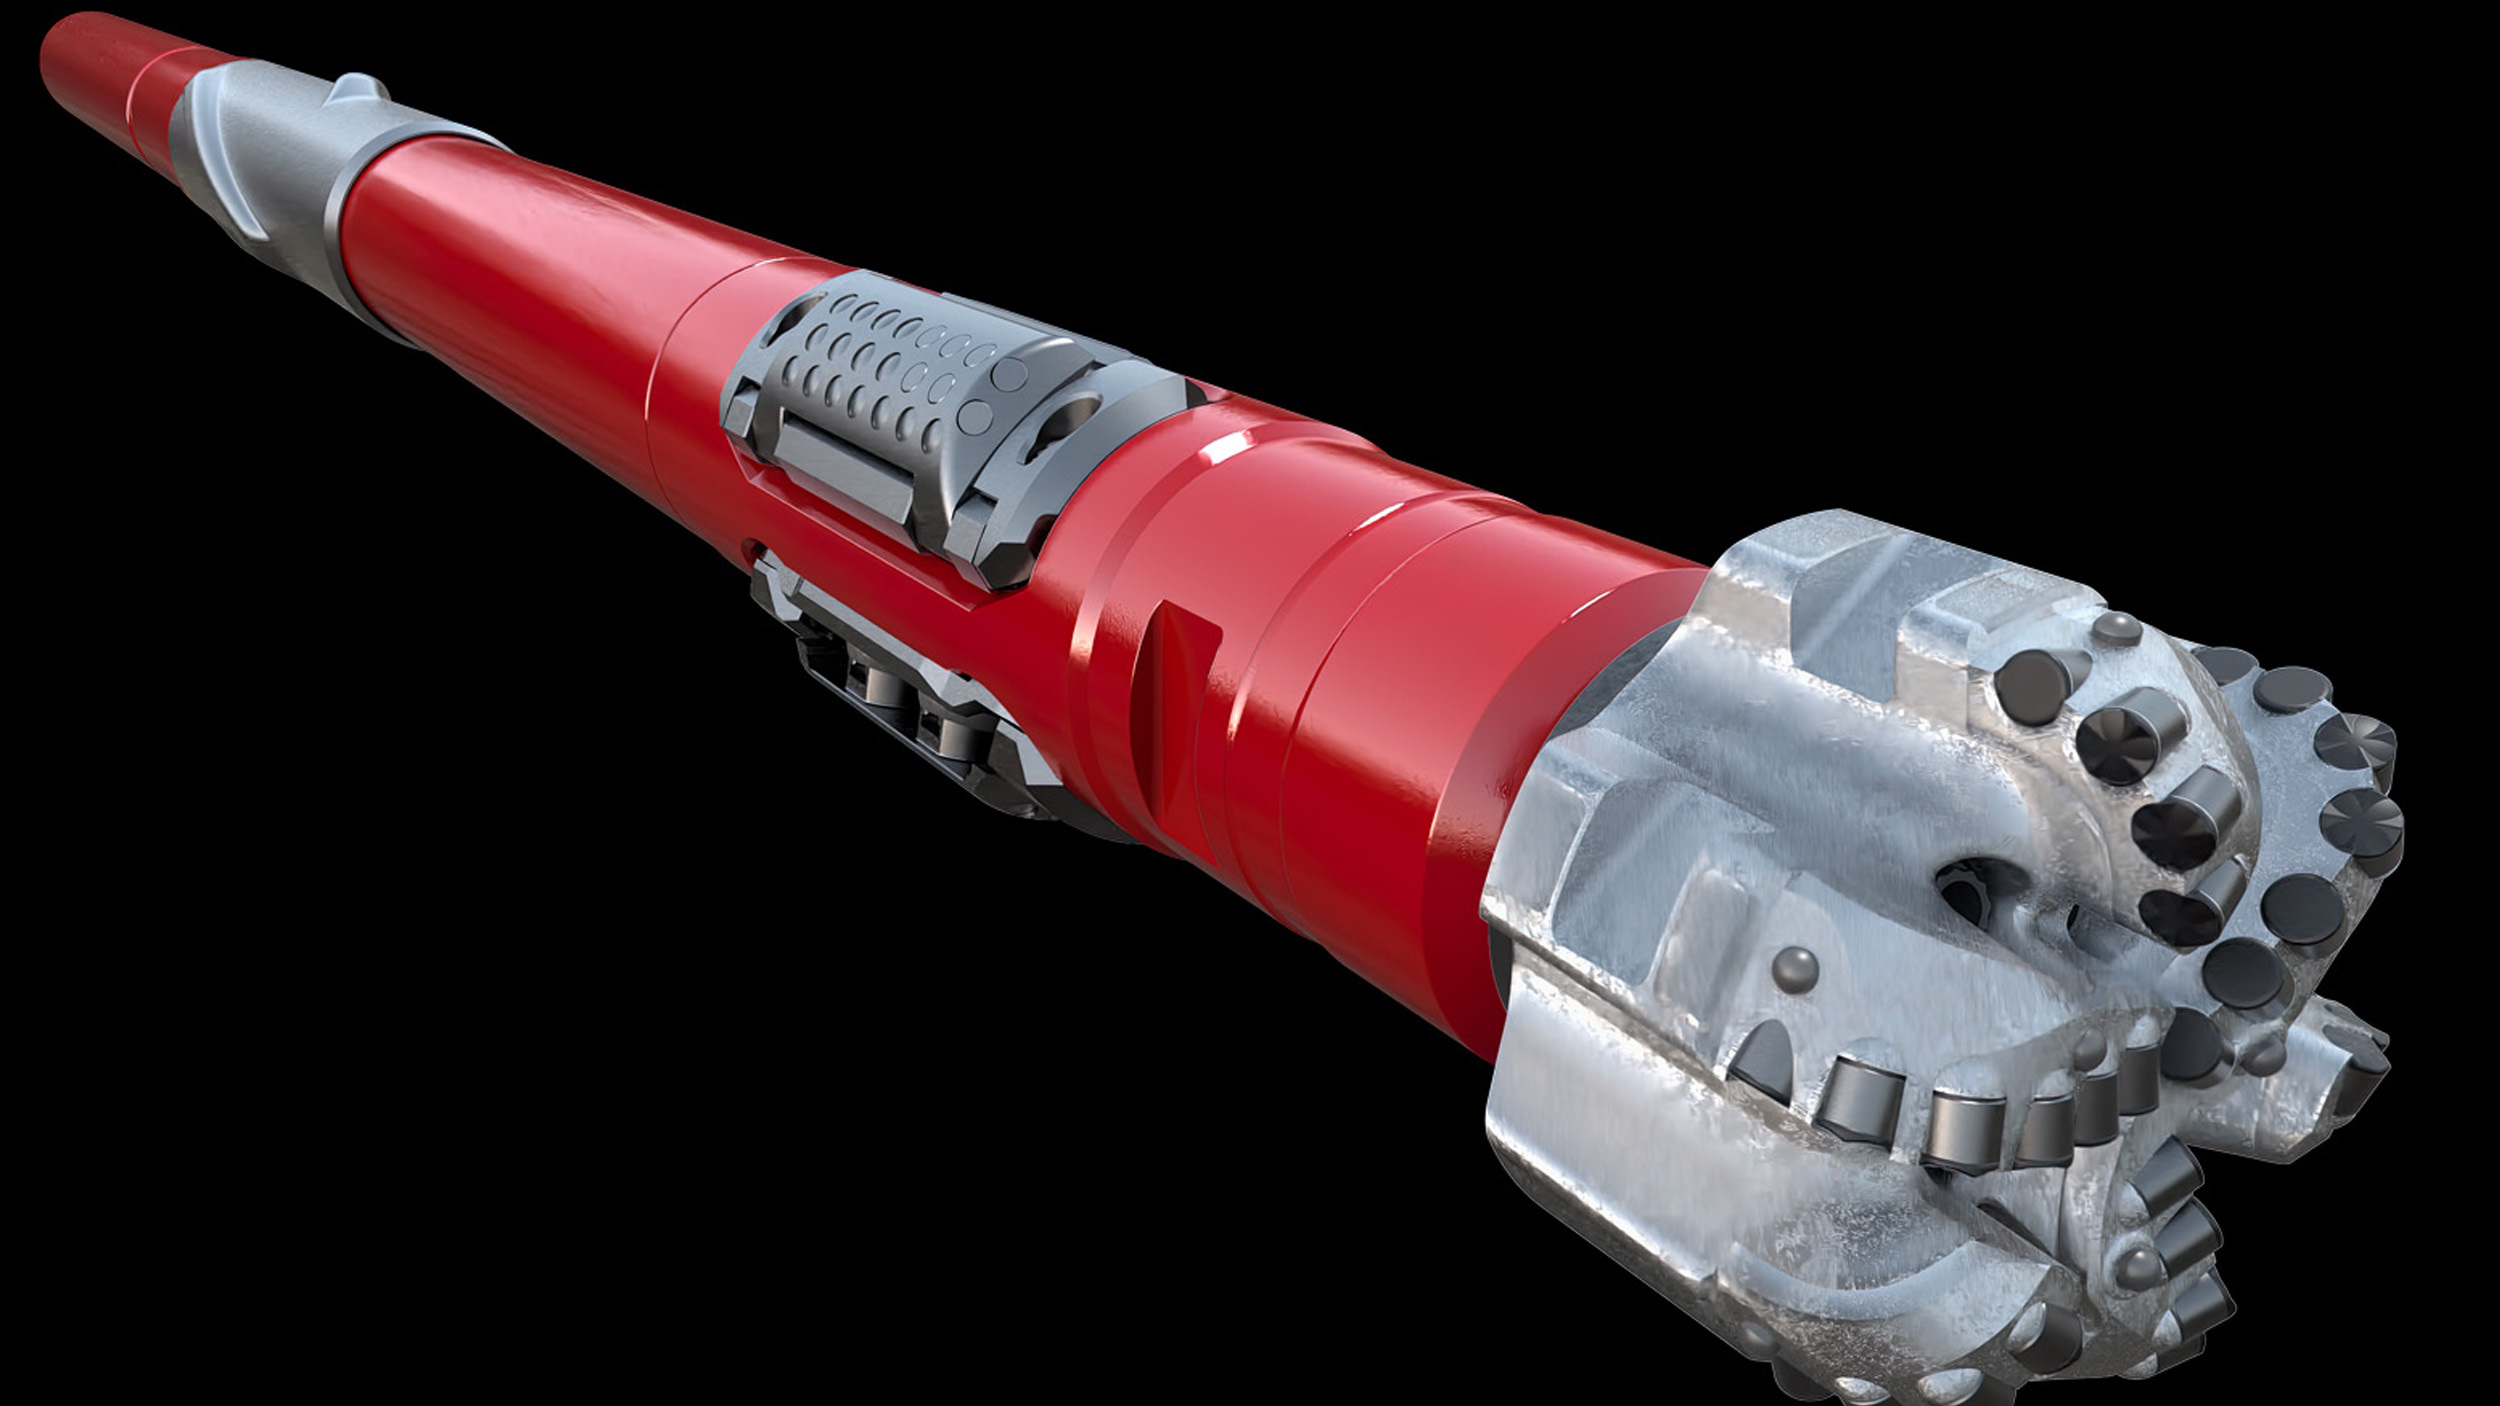 Operator achieves longer, more consistent runs with HyperSteer™ bit